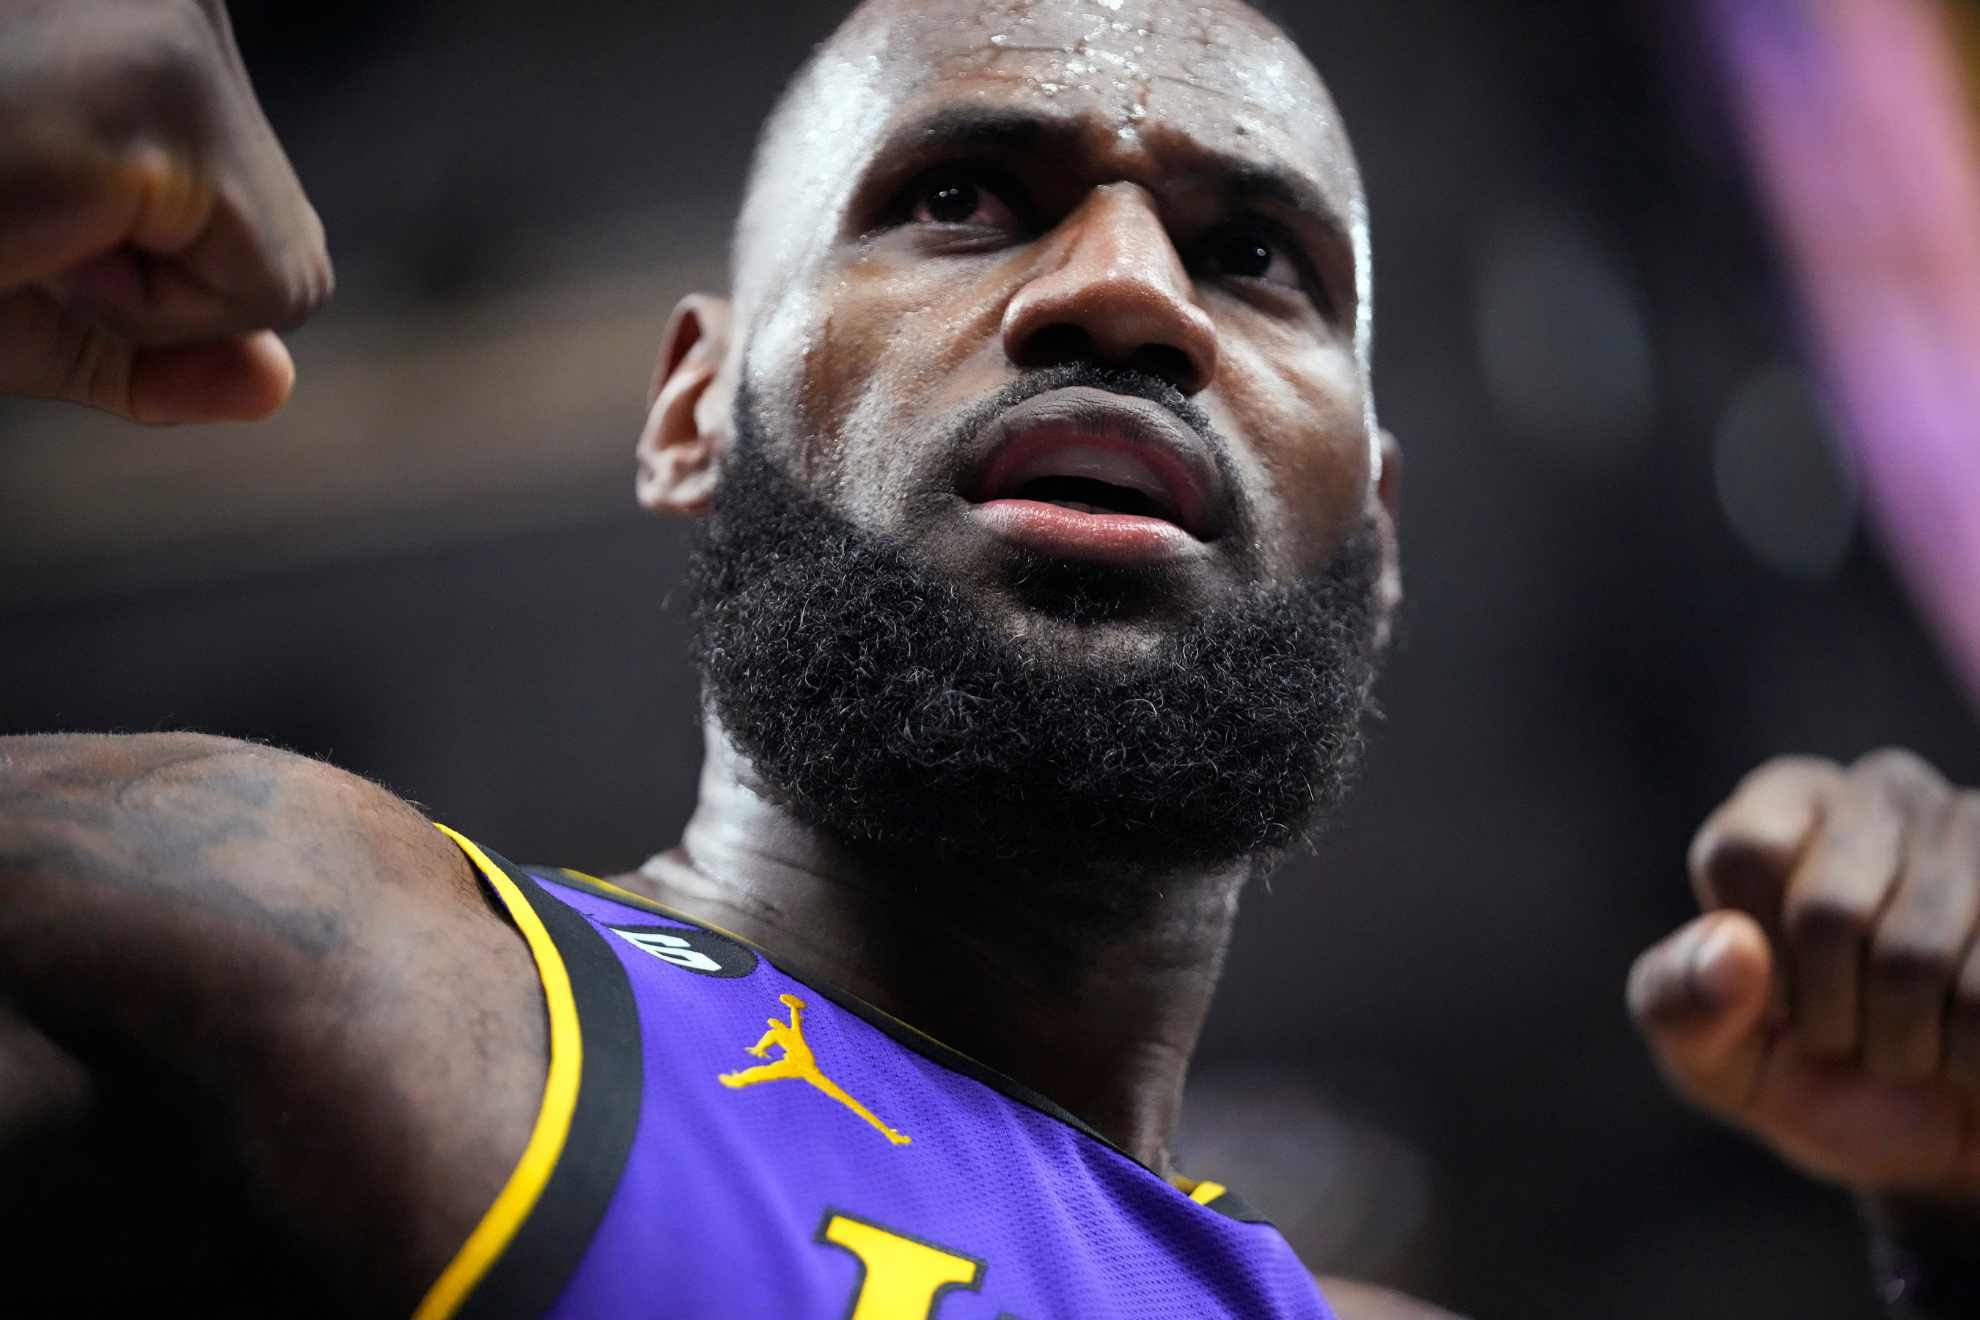 Los Angeles Lakers forward LeBron James reacts after scoring against the Utah Jazz during the first half of an NBA basketball game Tuesday, April 4, 2023, in Salt Lake City.